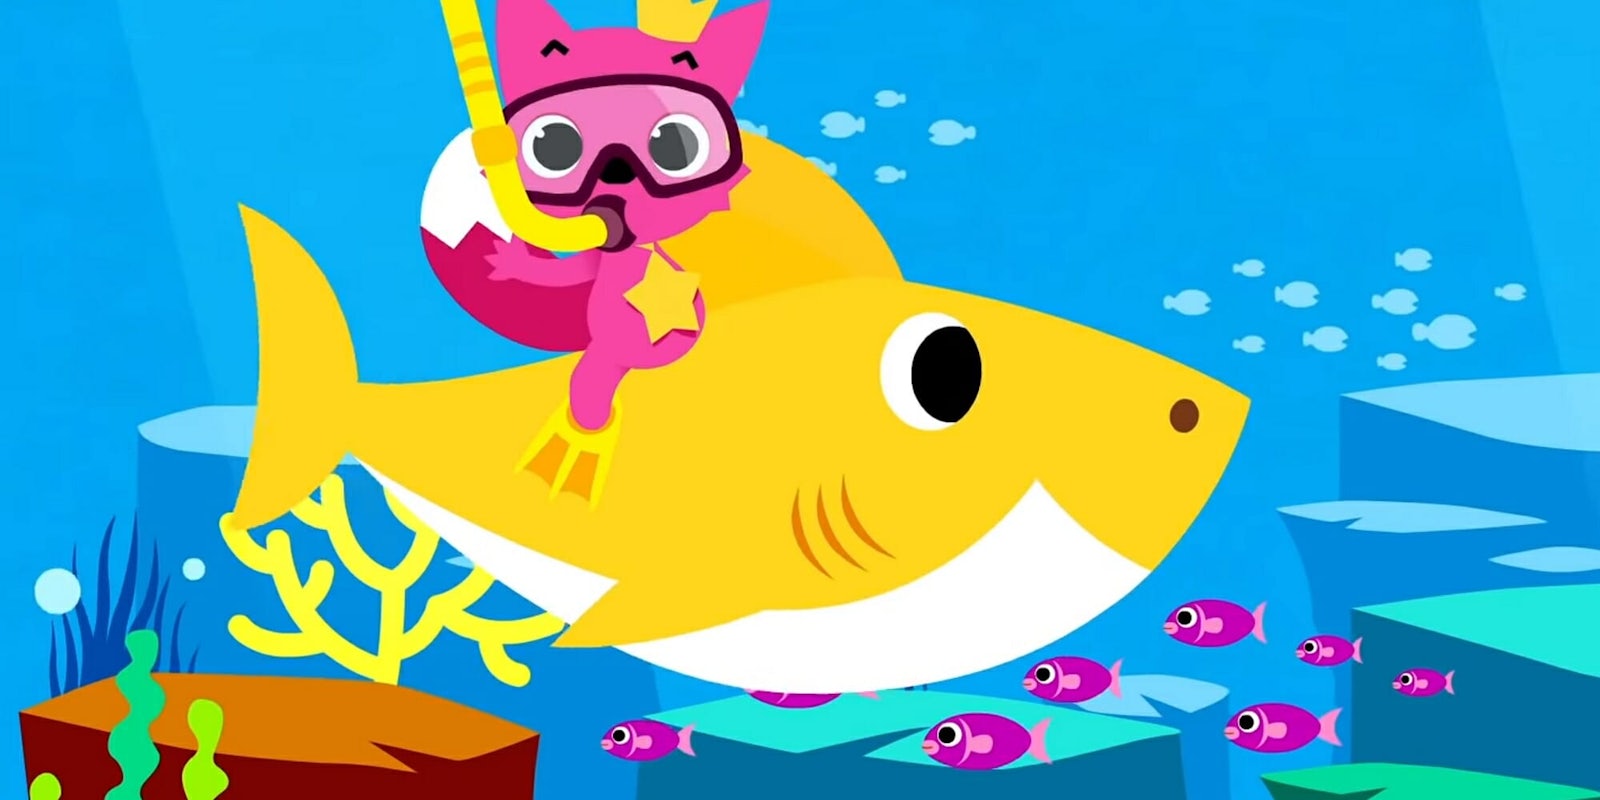 The Baby Shark song is catchy to a fault, and it reminds plenty of Twitter users of their childhoods.